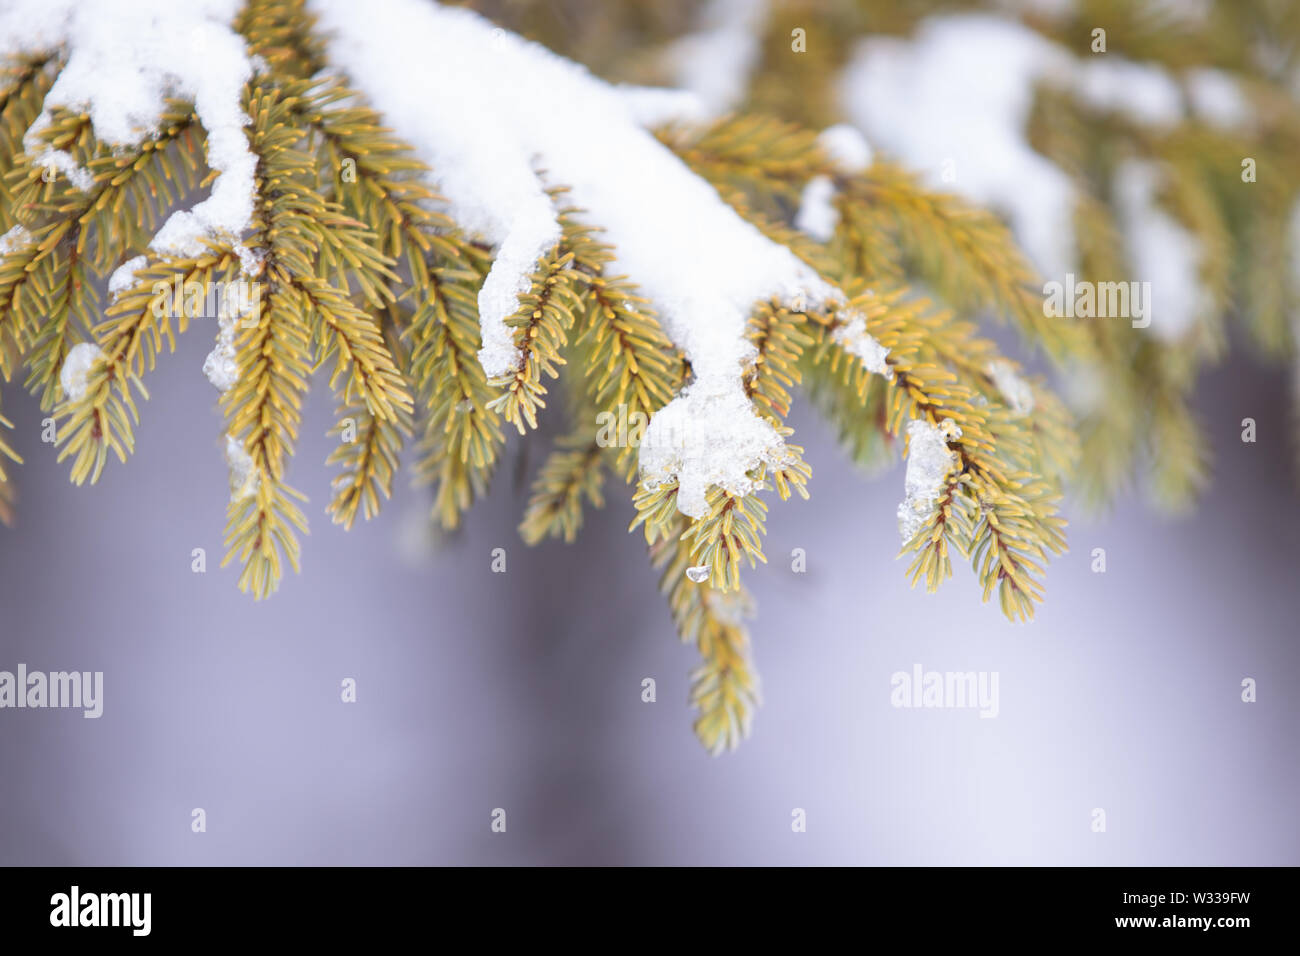 Black Spruce Pine Tree Picea Mariana Up Close With Ice and Snow in Winter Stock Photo